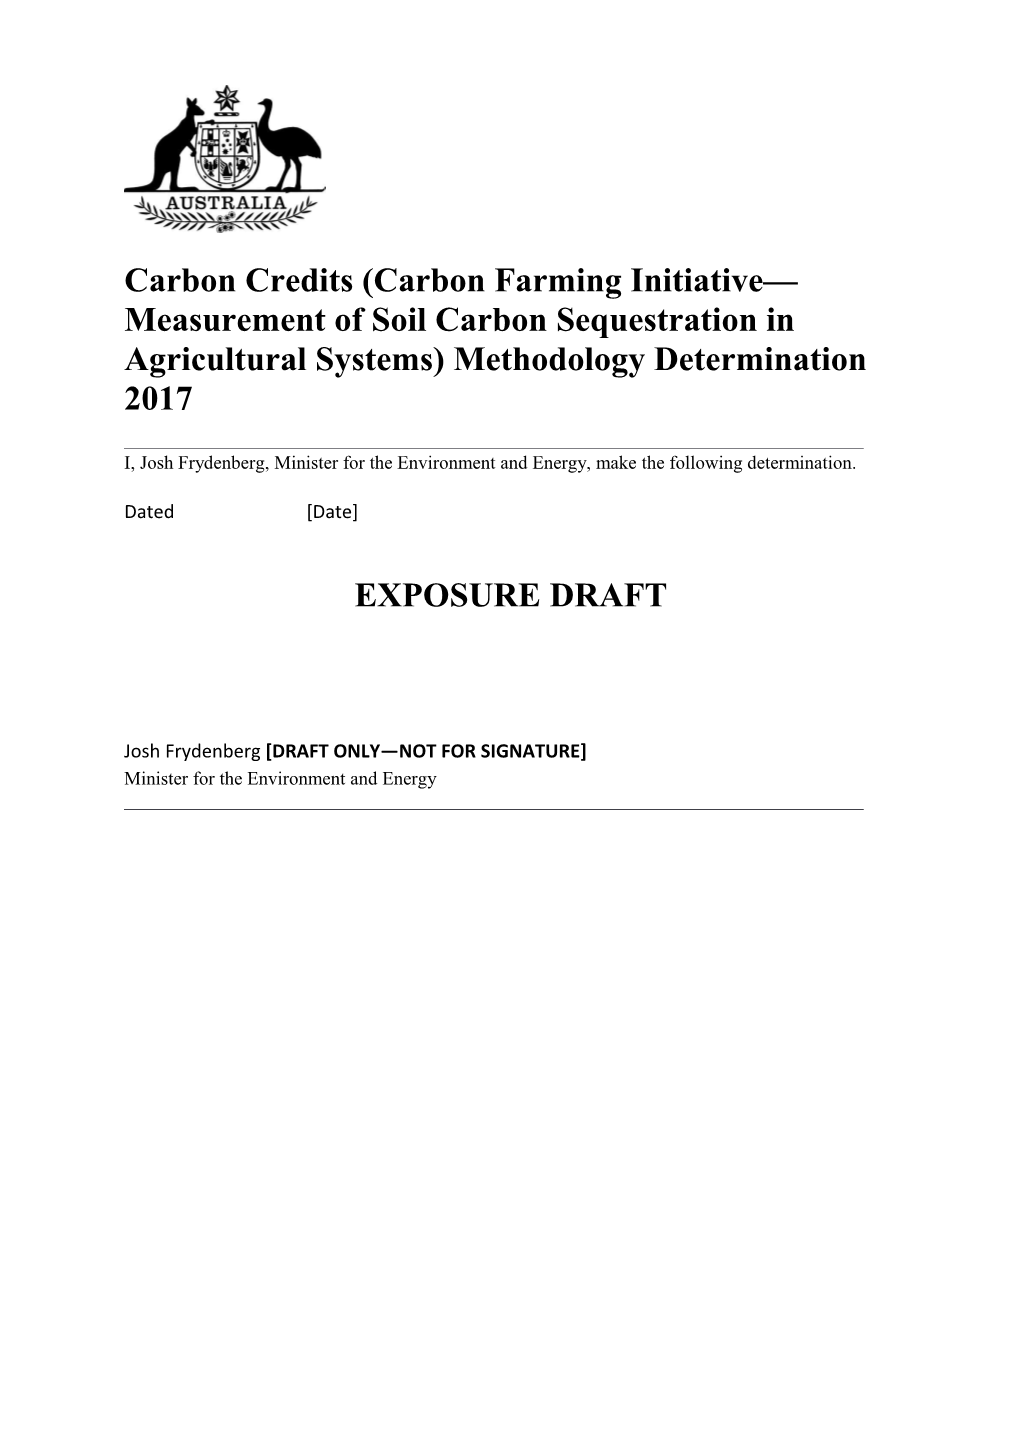 Measurement of Soil Carbon Sequestration in Agricultural Systems - Draft Determination